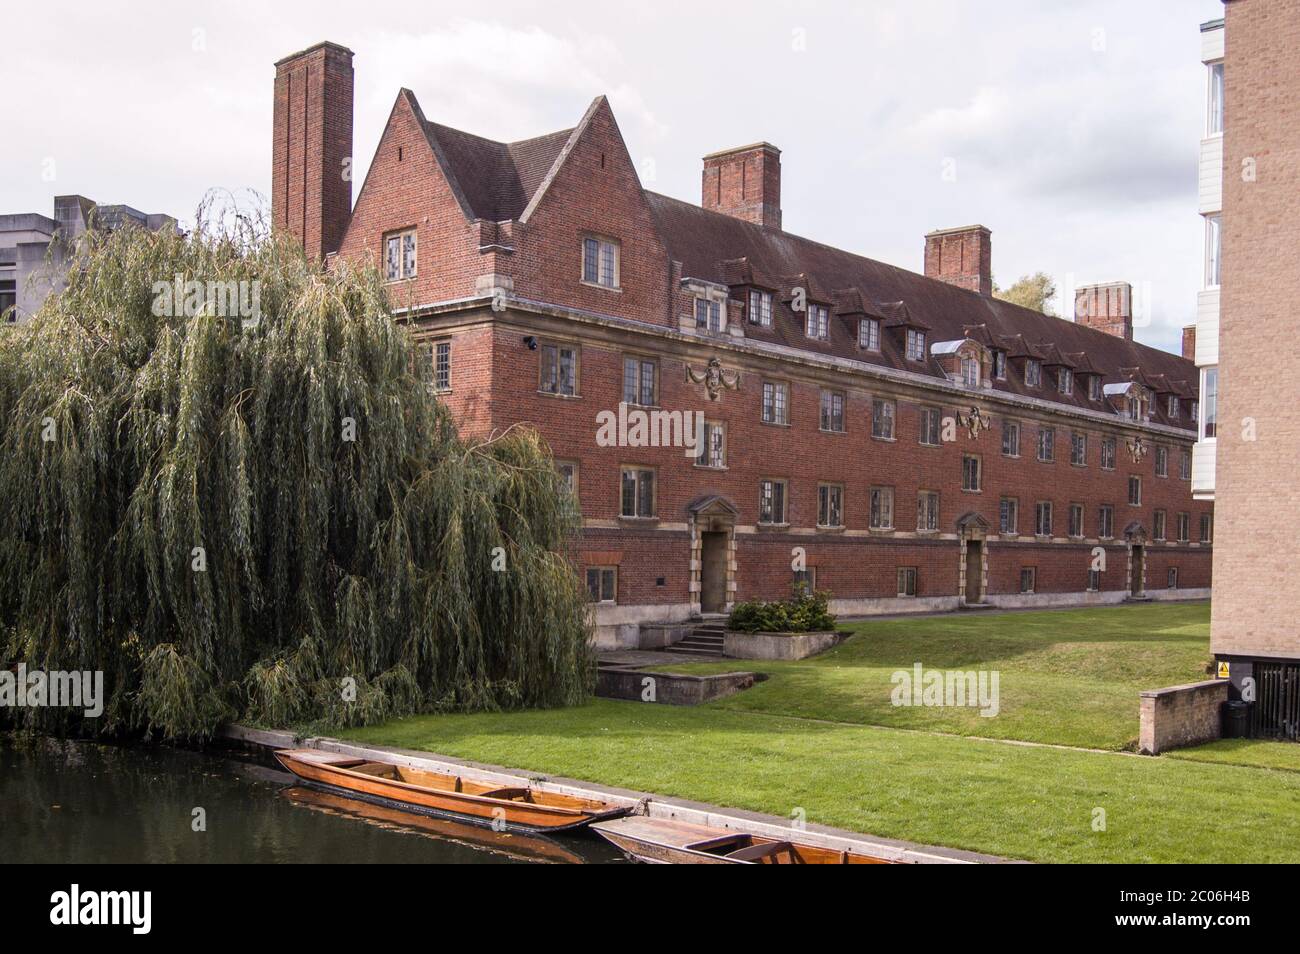 View of St John's College on the banks of the River Cam. Part of the University of Cambridge. Stock Photo